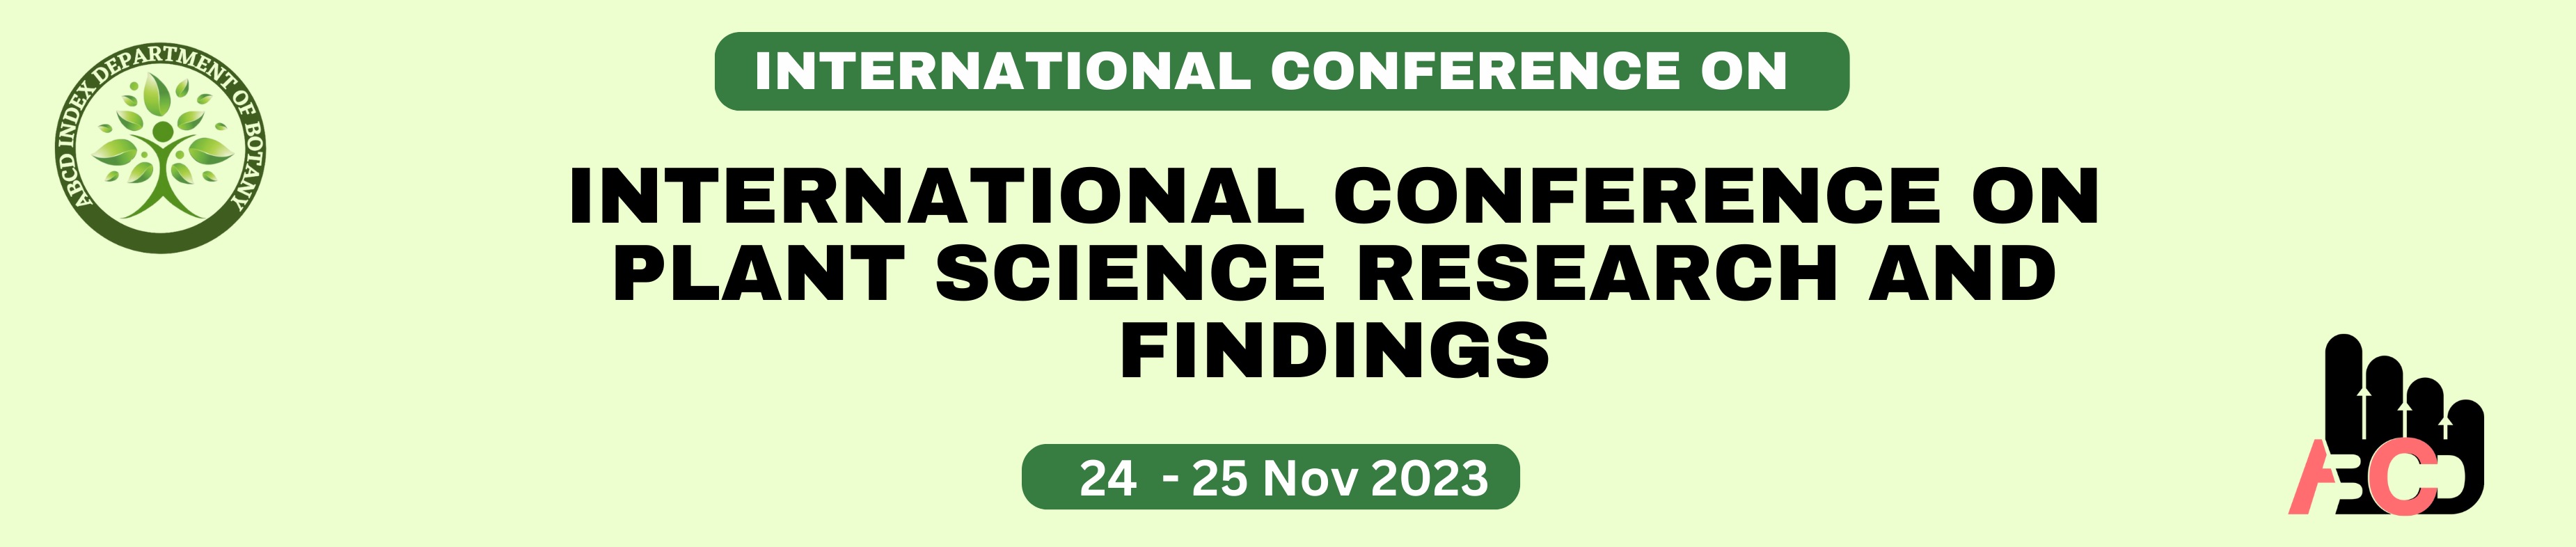 International Conference on Plant Science Research and Findings, Bhopal, Madhya Pradesh, India